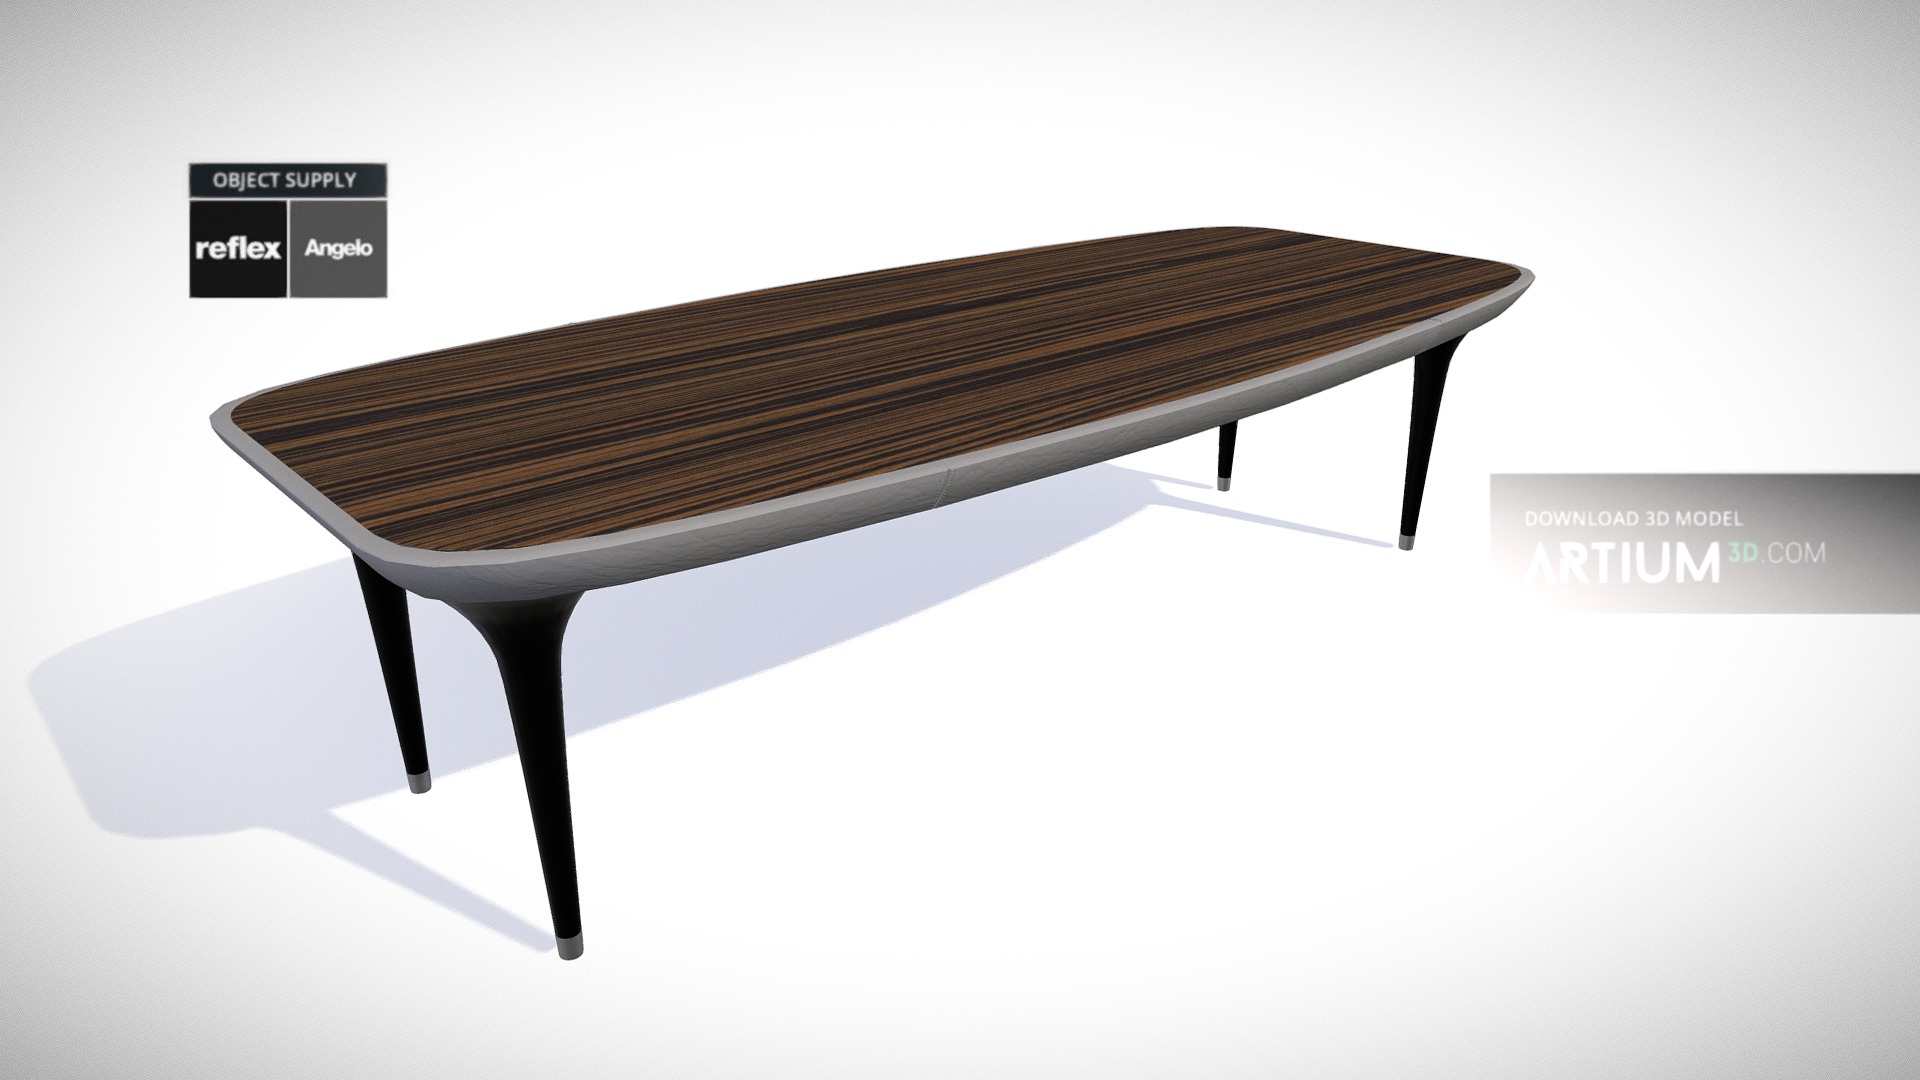 3D model ARK 72 from Reflex Angelo - This is a 3D model of the ARK 72 from Reflex Angelo. The 3D model is about a wooden table with a sign.